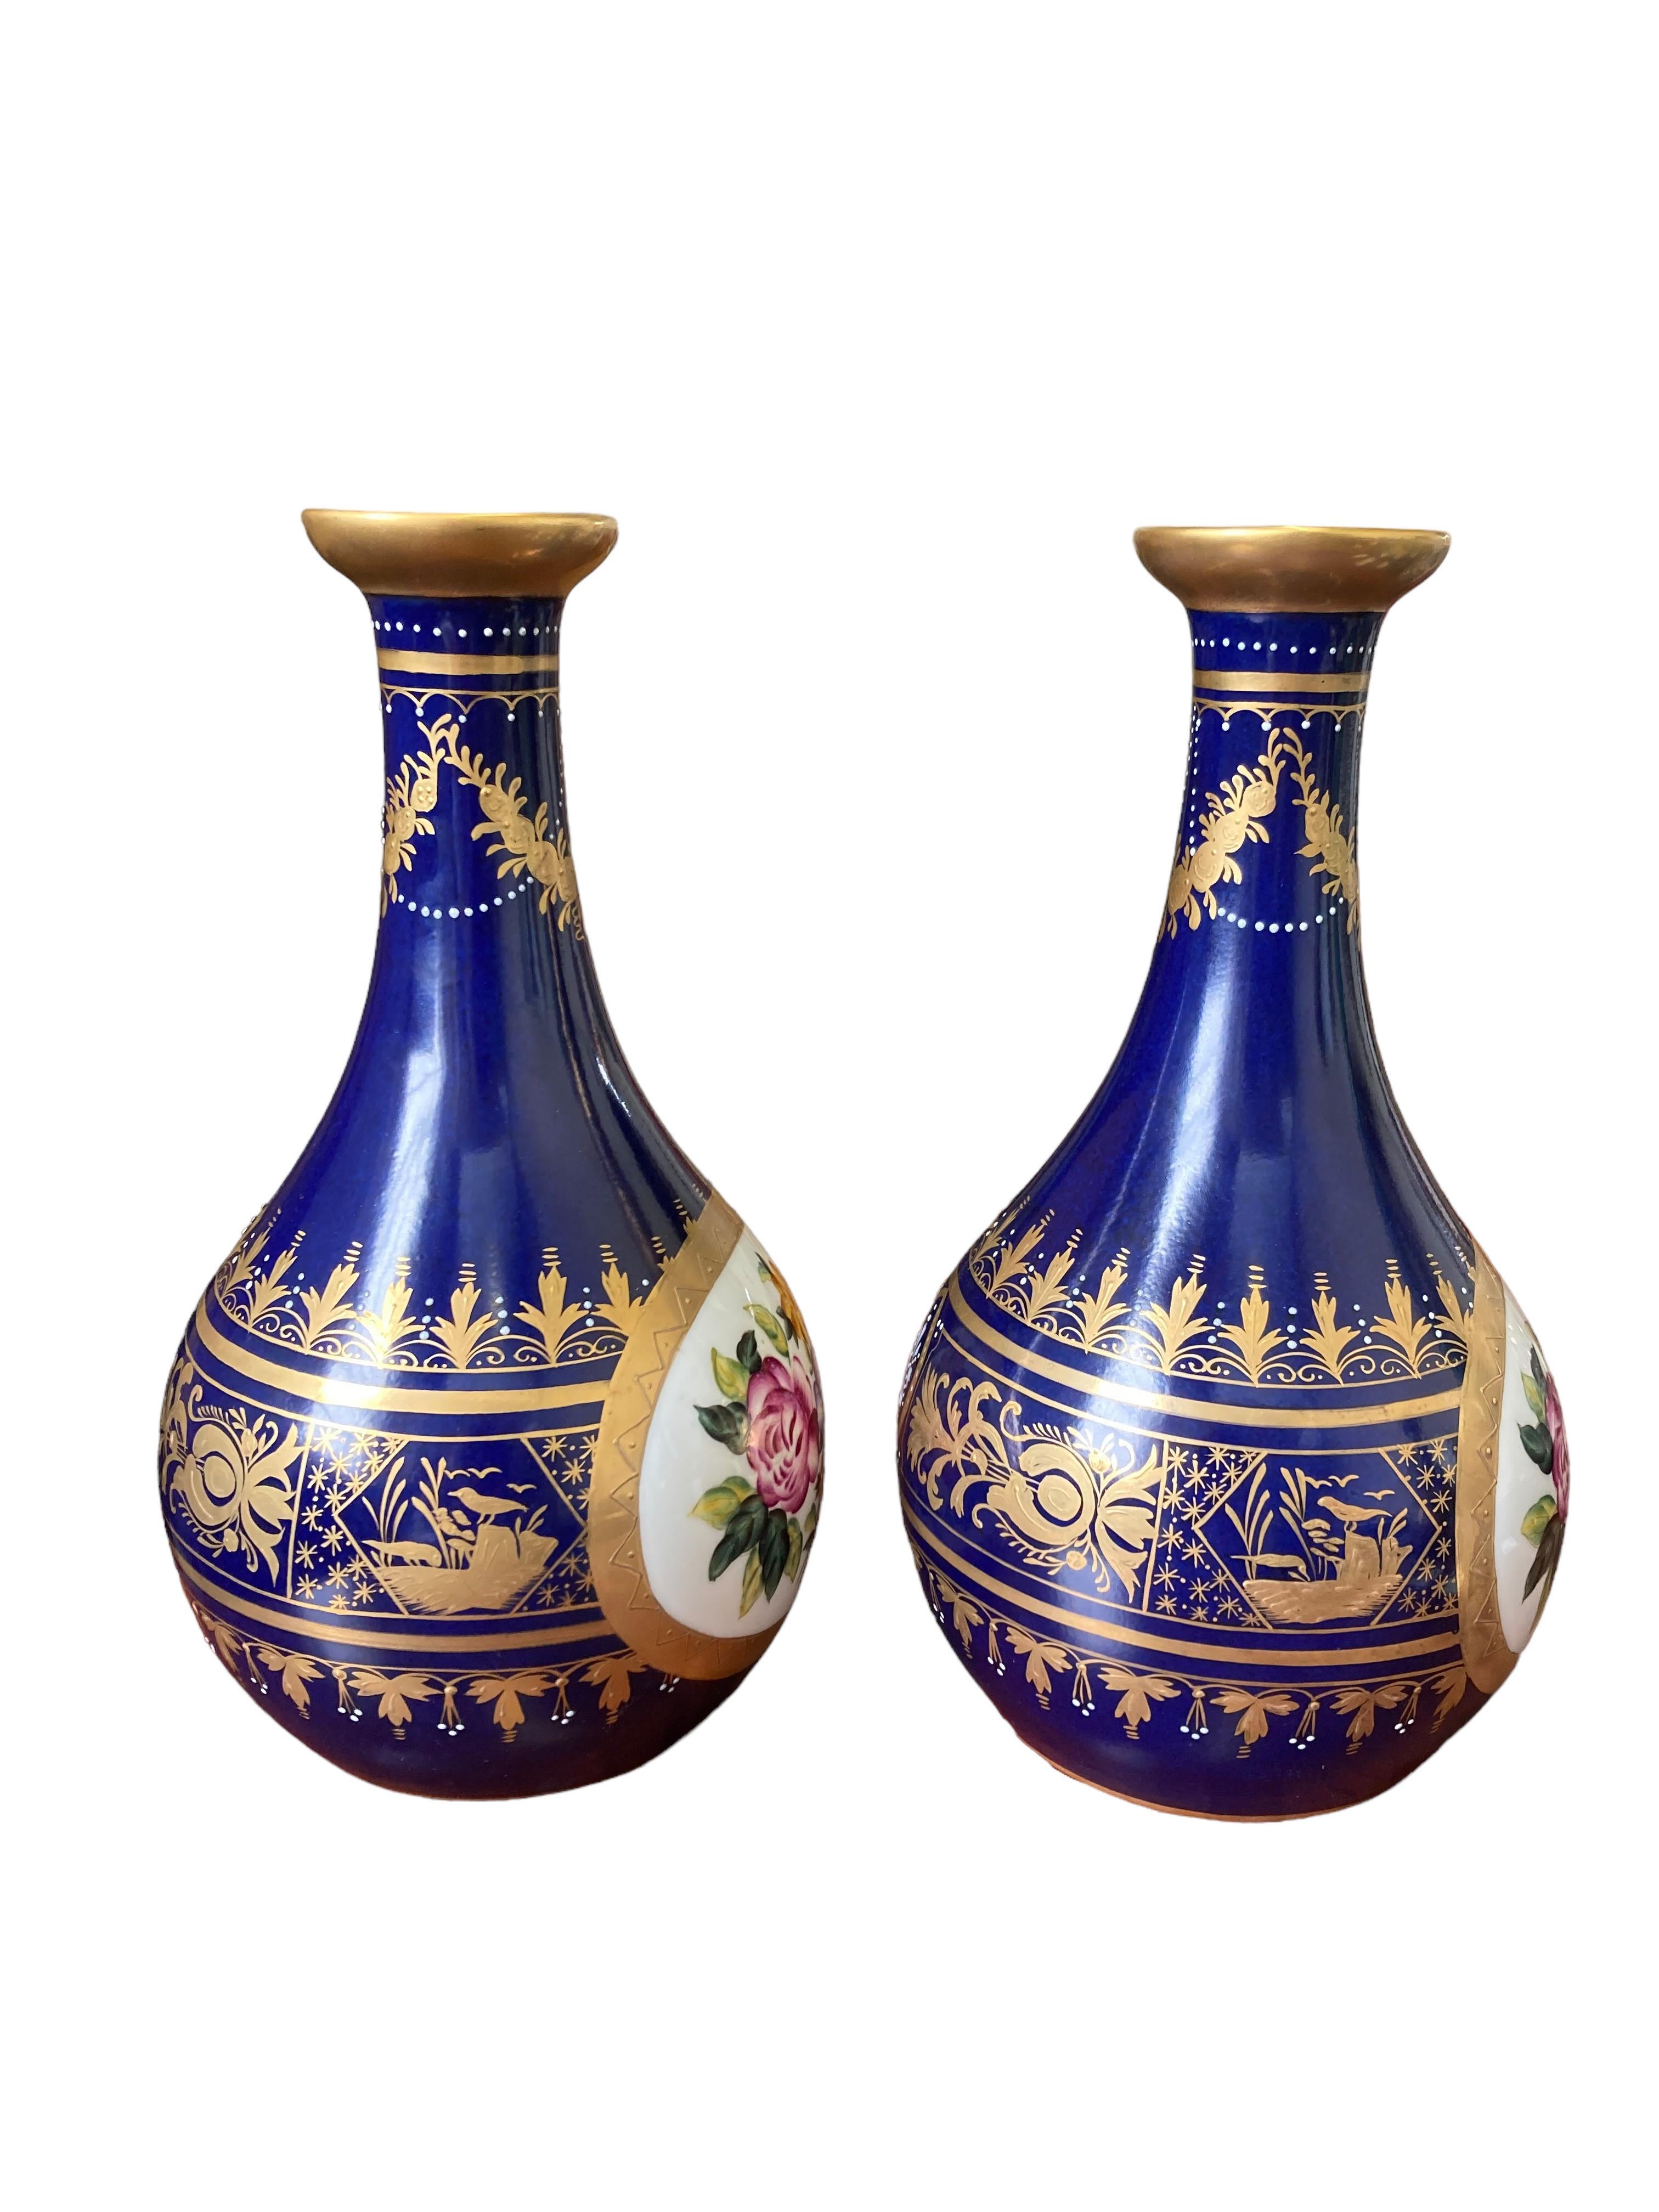 This beautiful pair of Royal Vienna bud vases is in excellent condition, with no damage to either vase. There is a small area at one of the top rims of a circular spot in the gold paint, as shown in a photo, which is original to when the pieces were